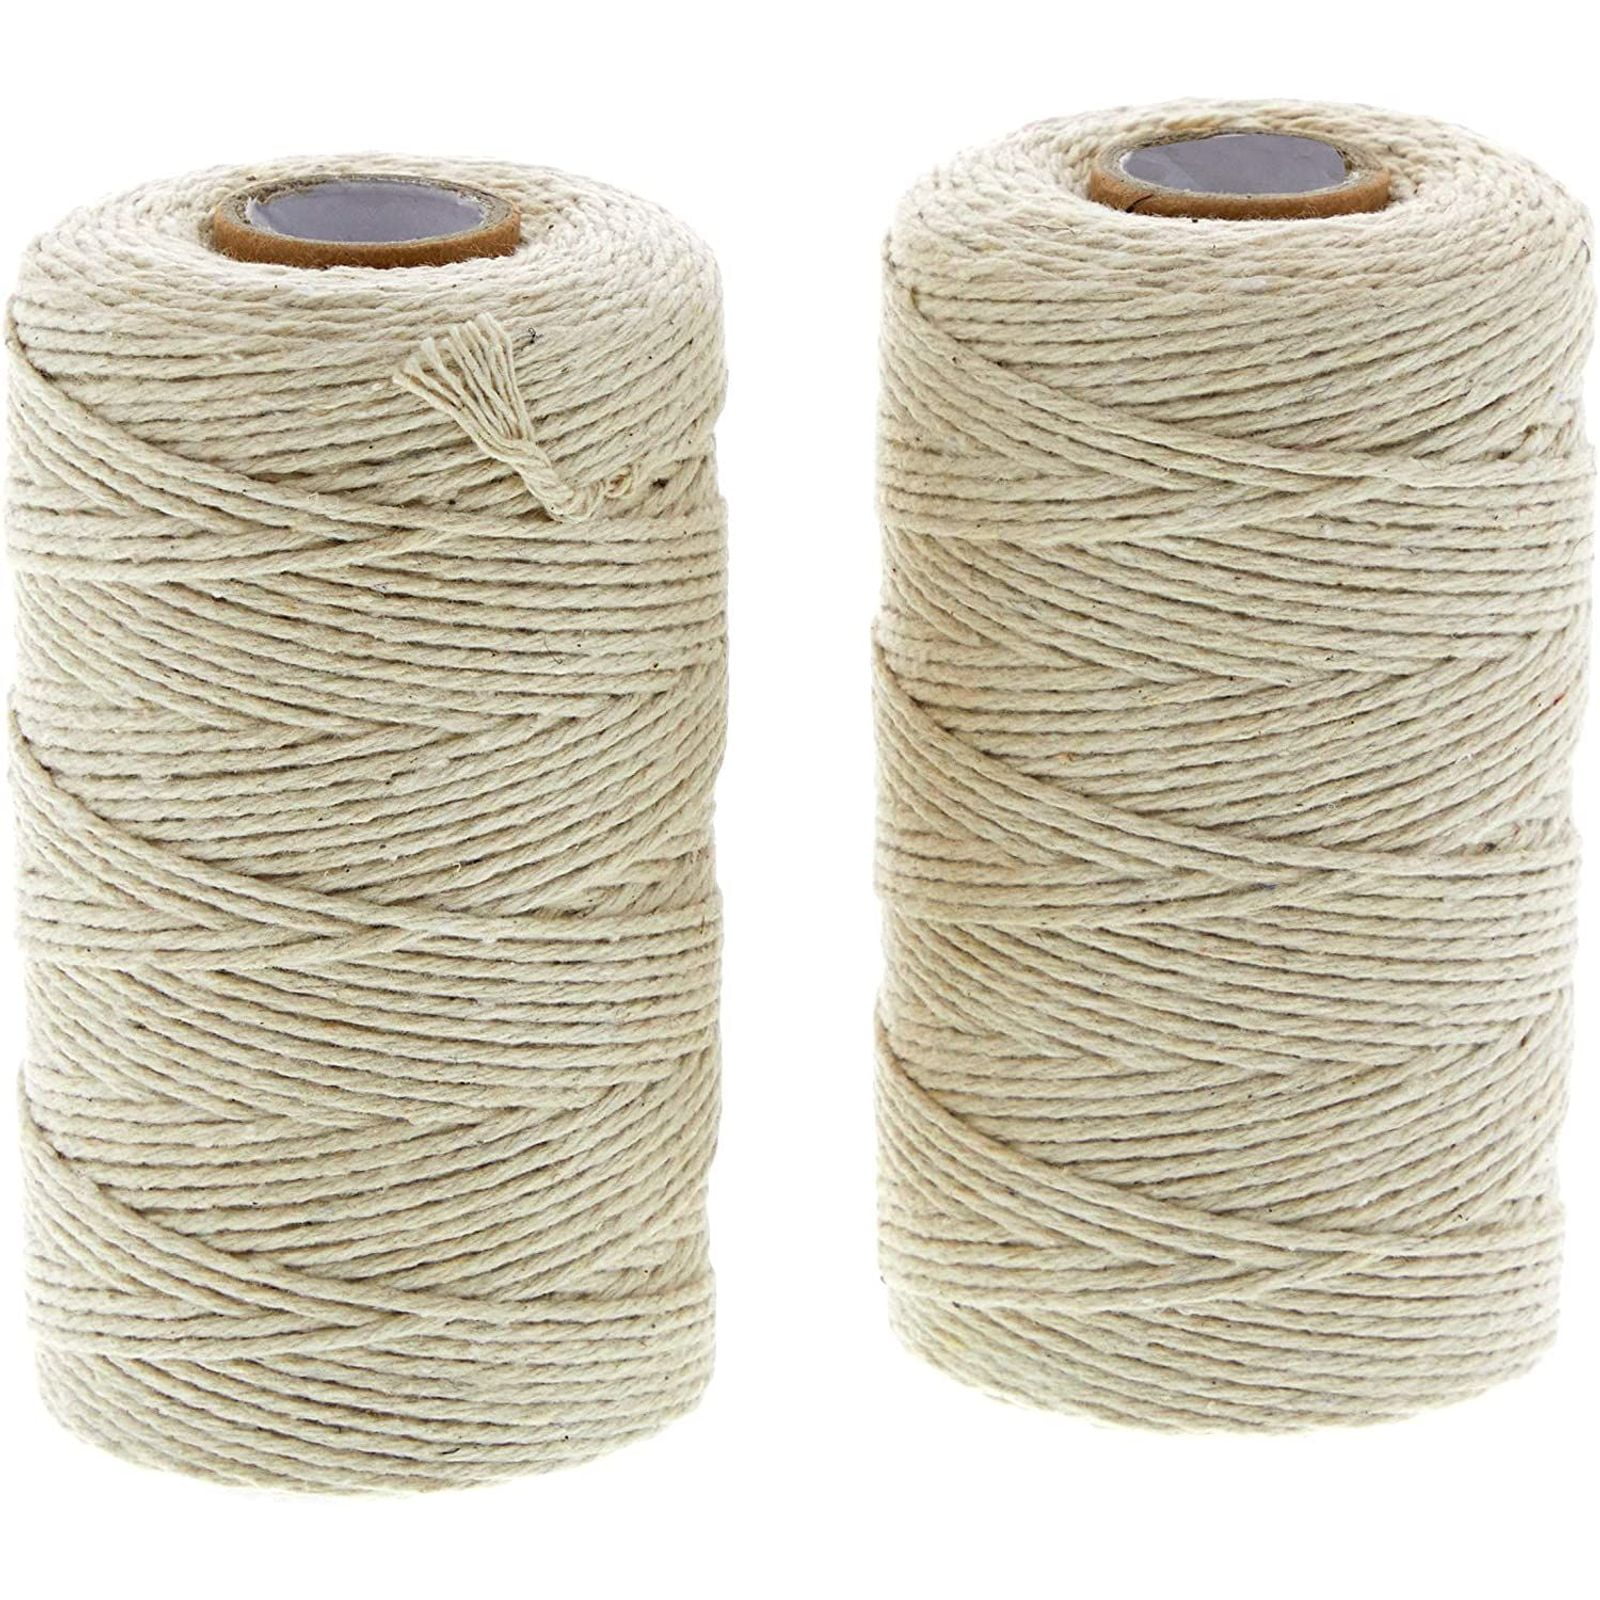 Details about   2 Pack Kitchen Twine by Farberware 75 Feet Each